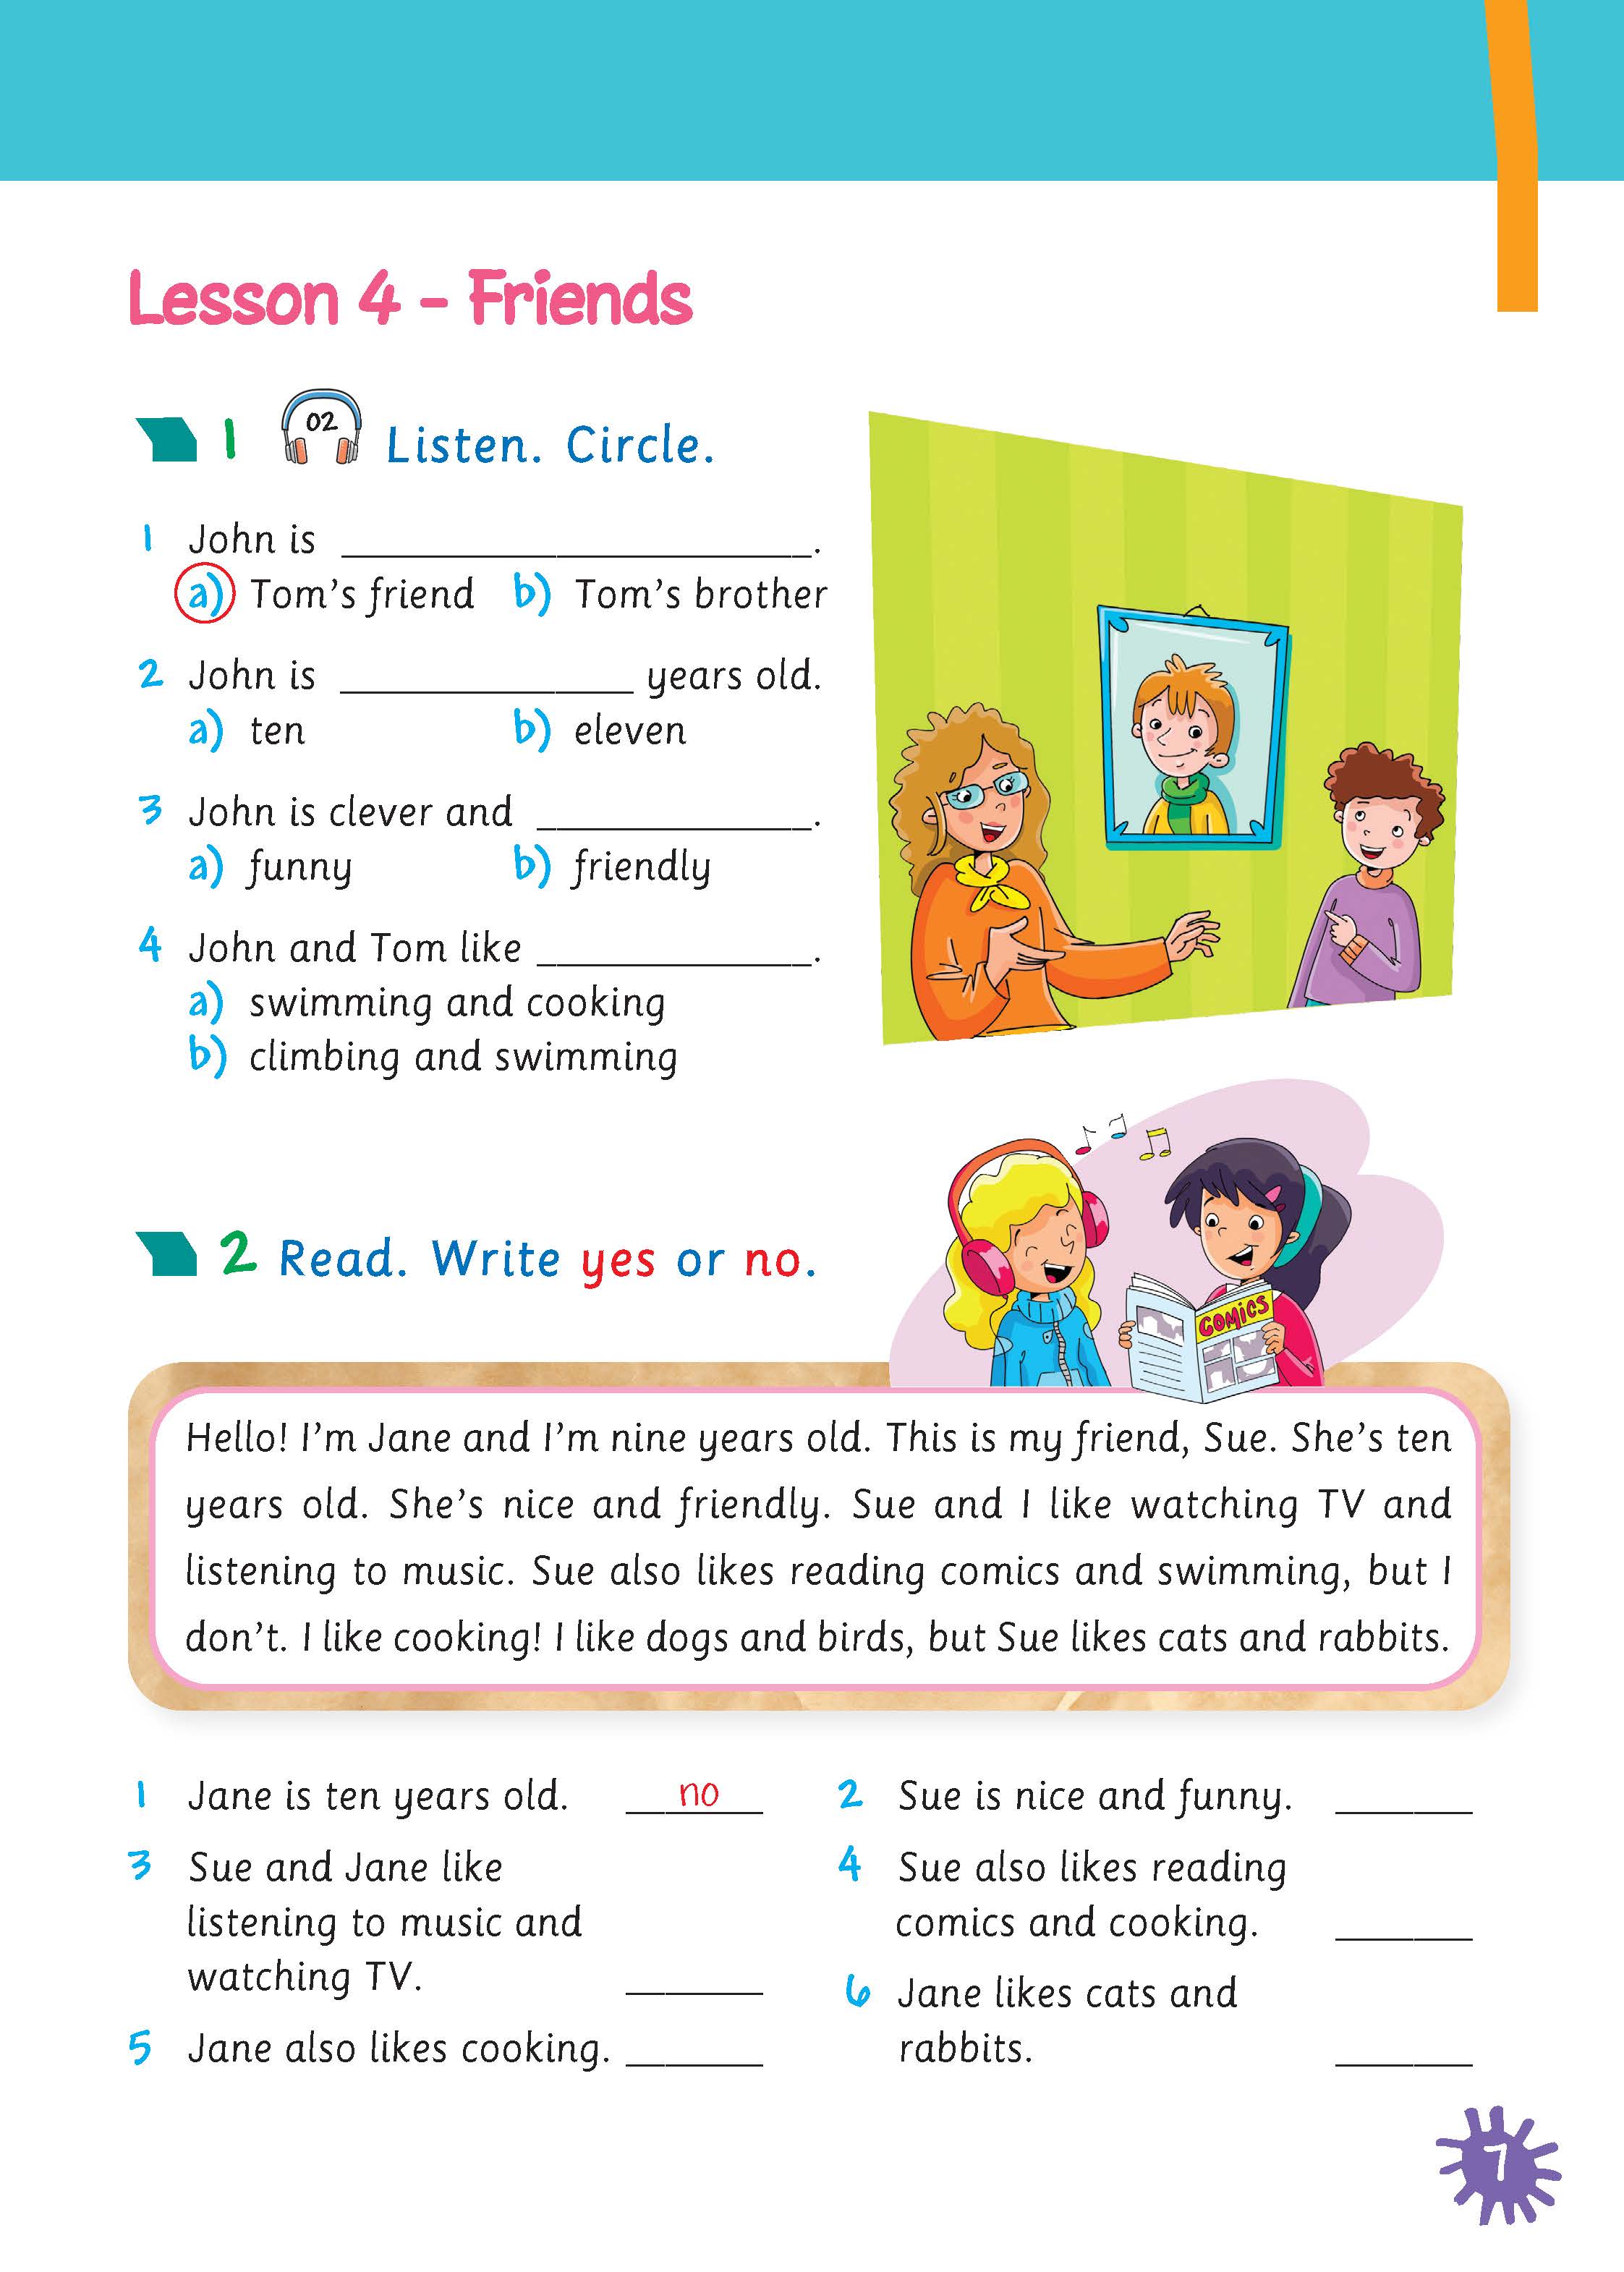 Tiếng Anh 4 Extra and Friends - Activity Book